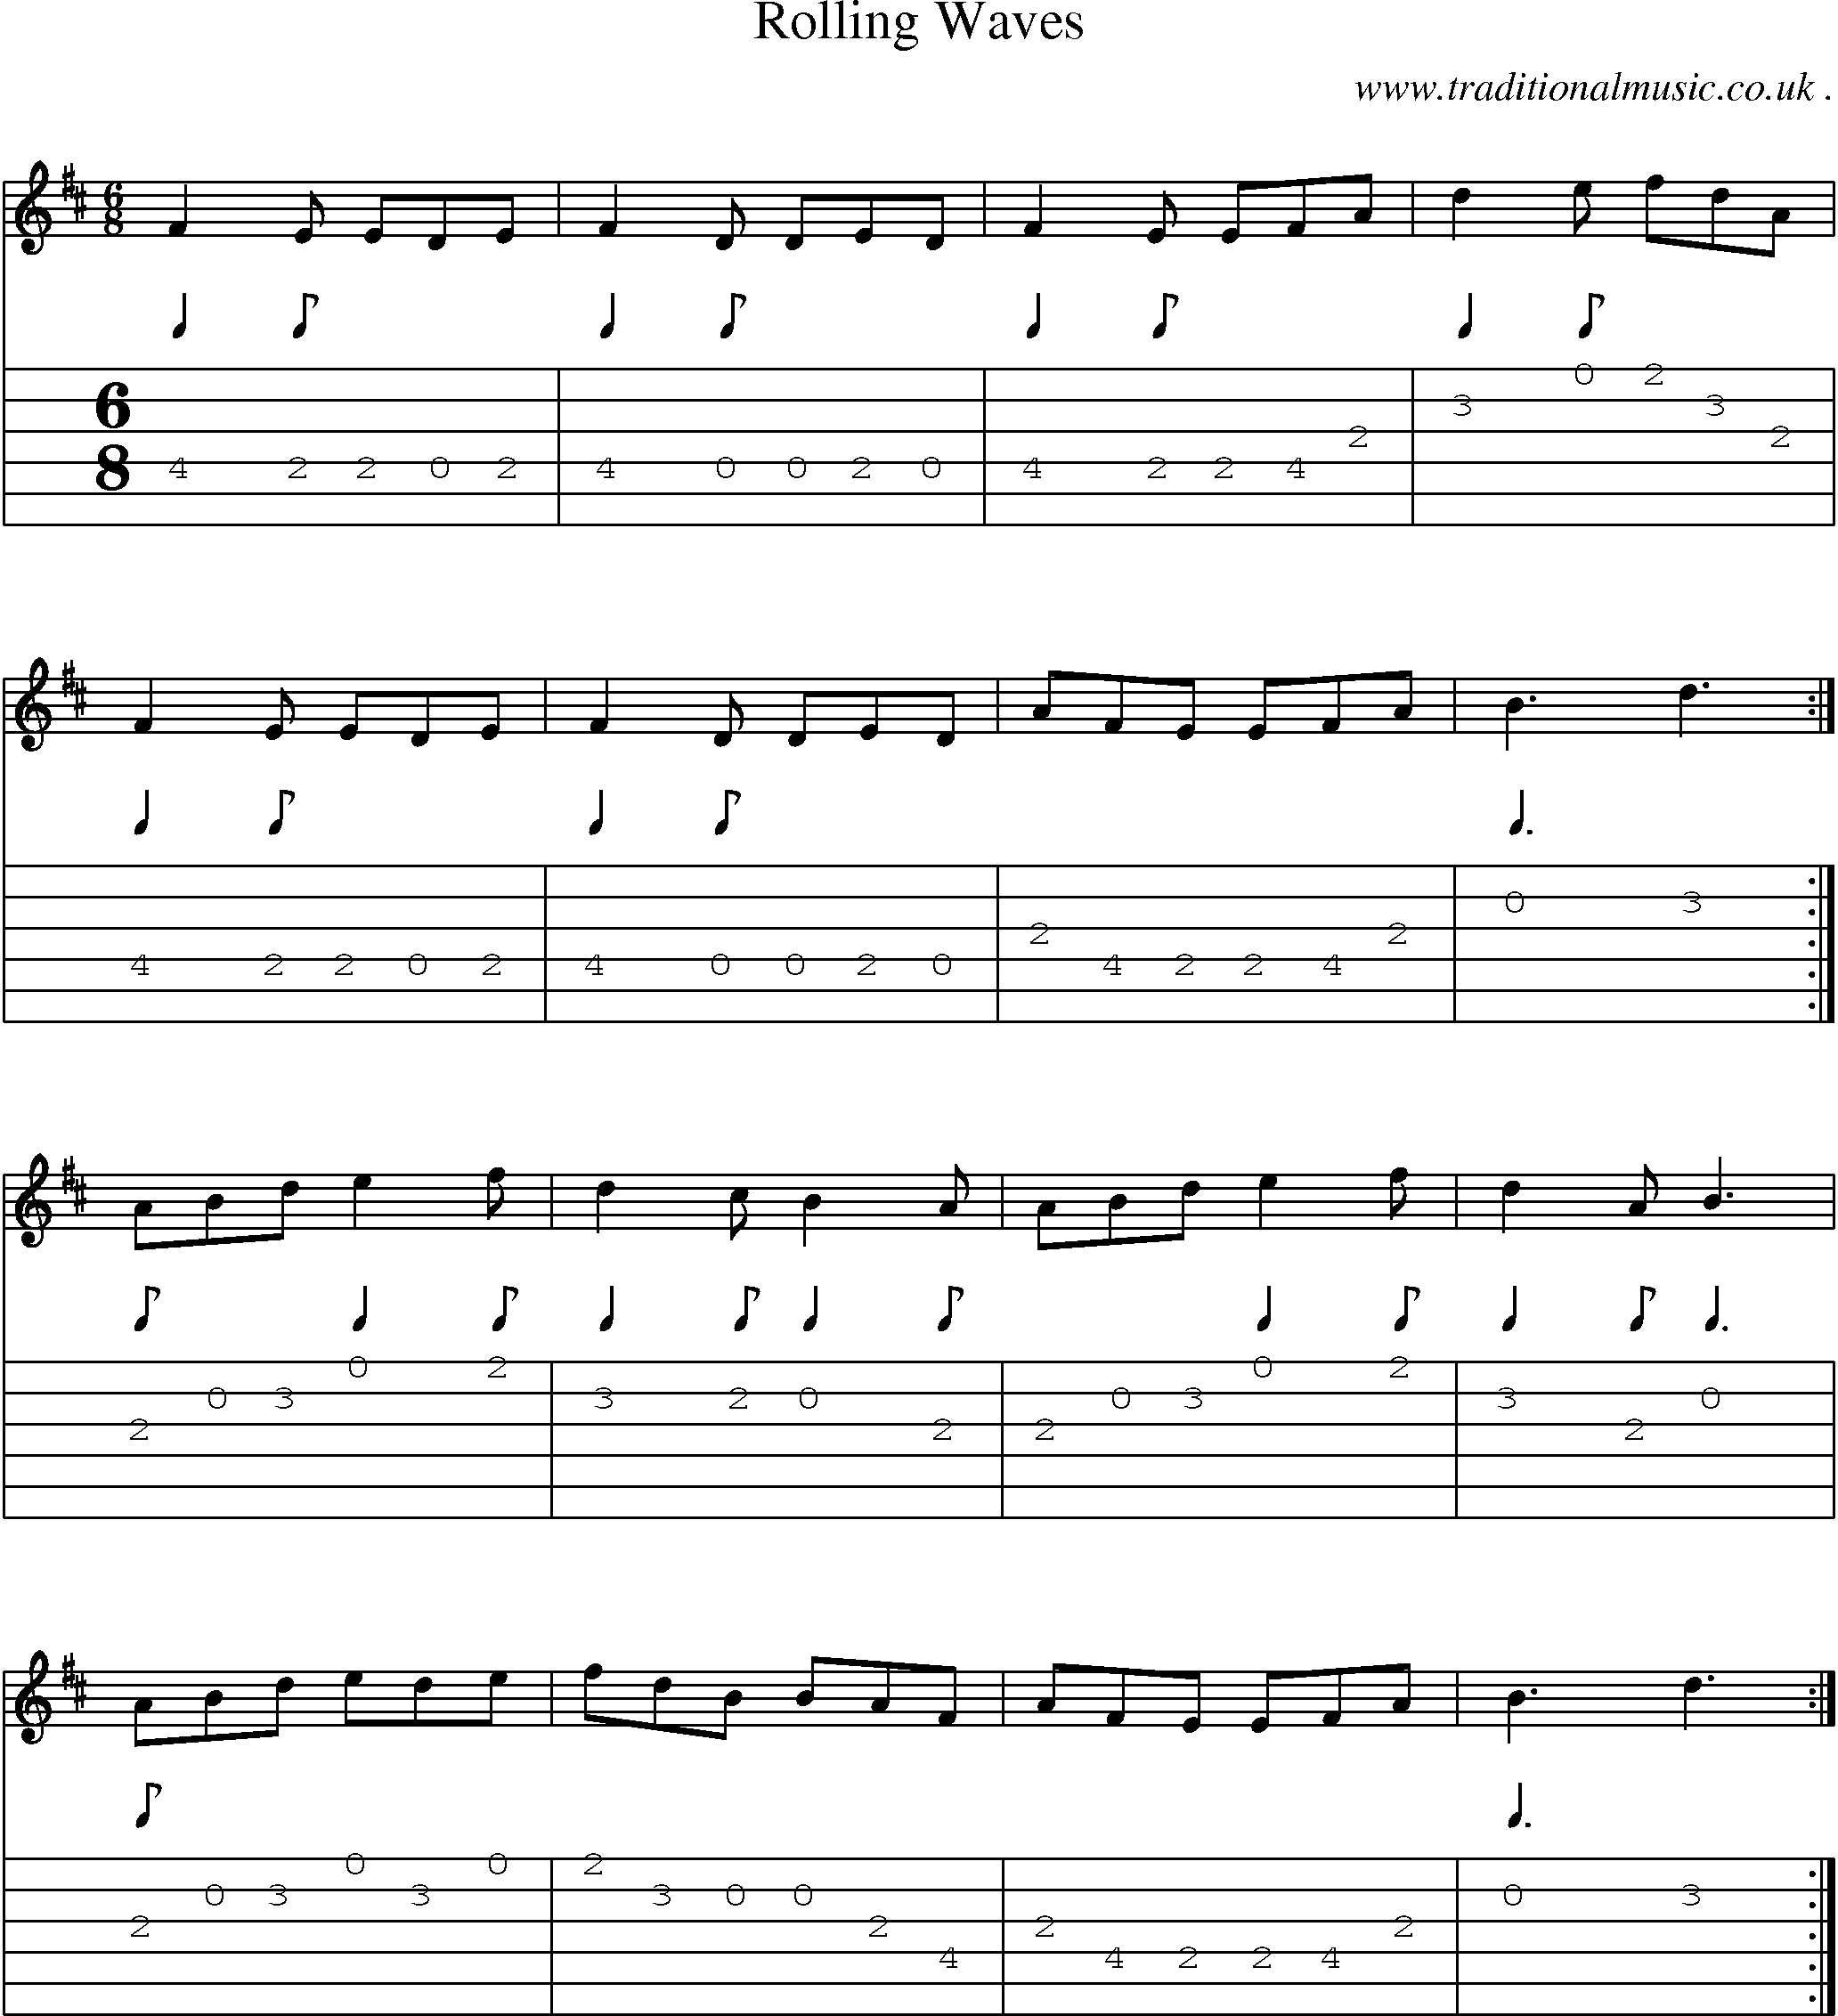 Sheet-Music and Guitar Tabs for Rolling Waves